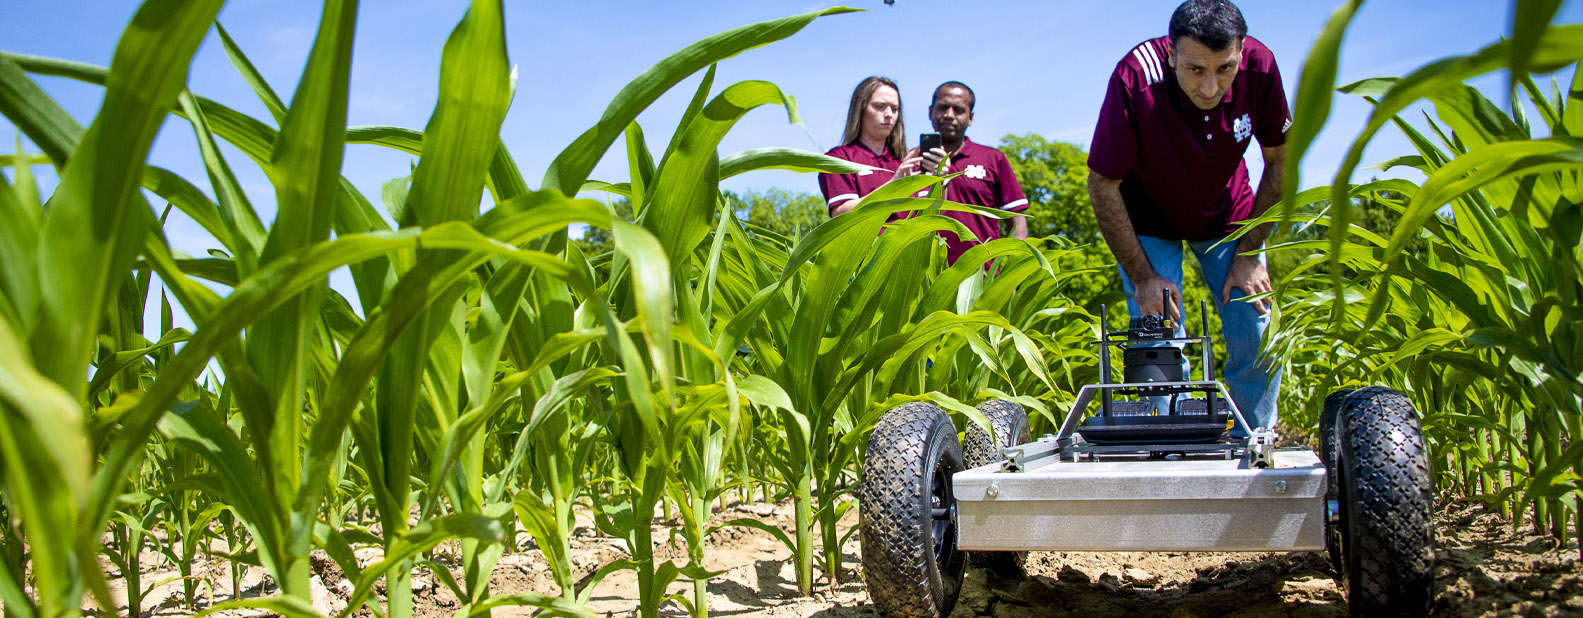 Students working with autonomous vehicles in a corn field.